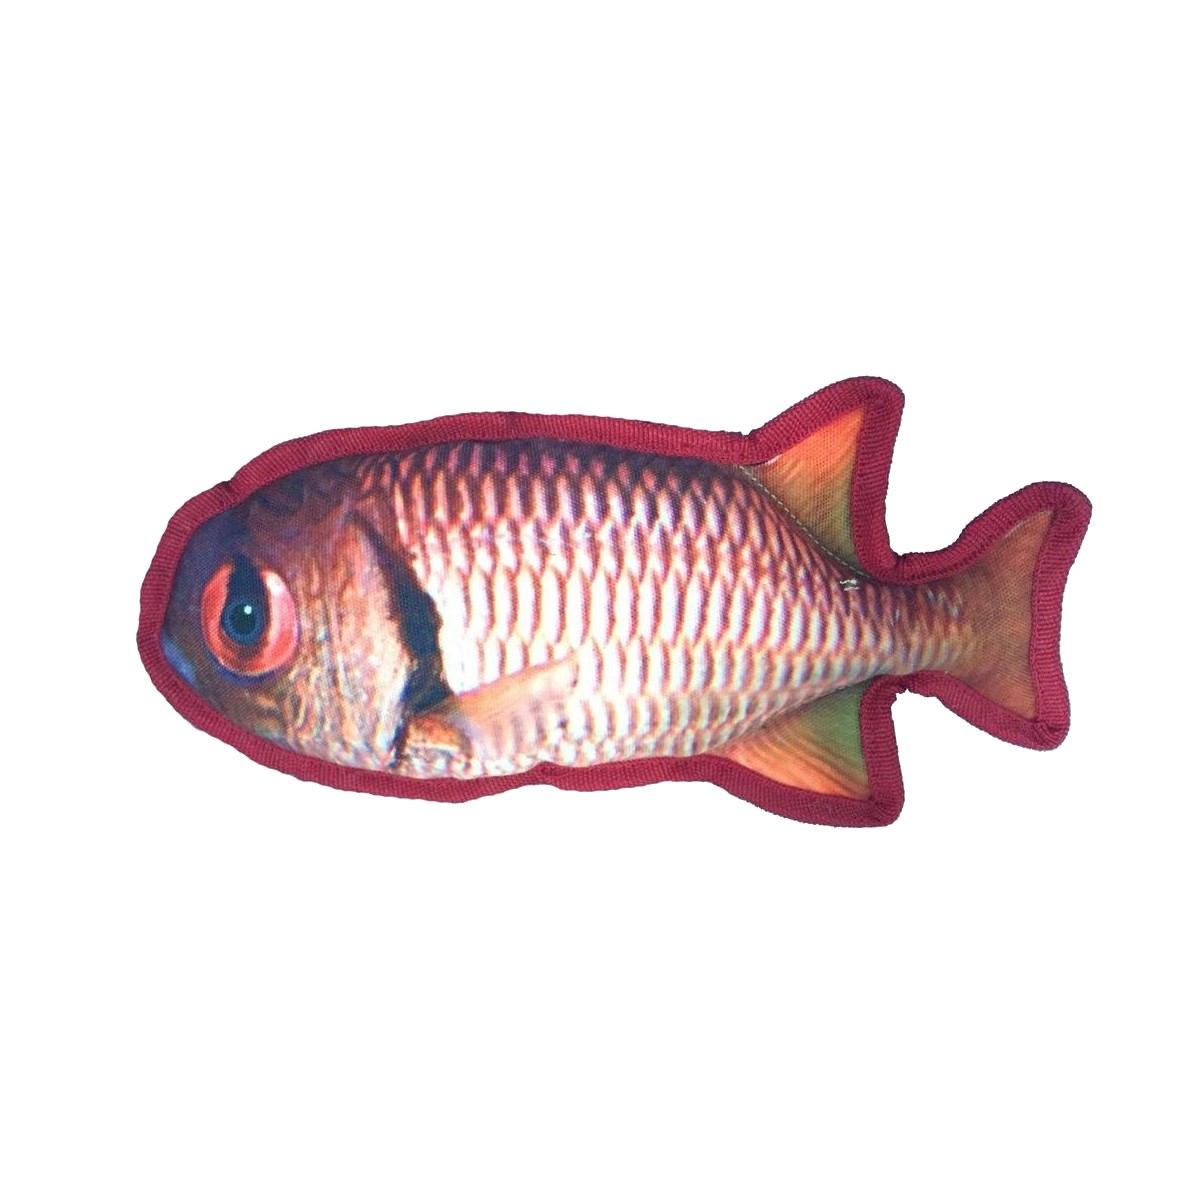 Dogline Tropical Fish Dog Toy - Snapper